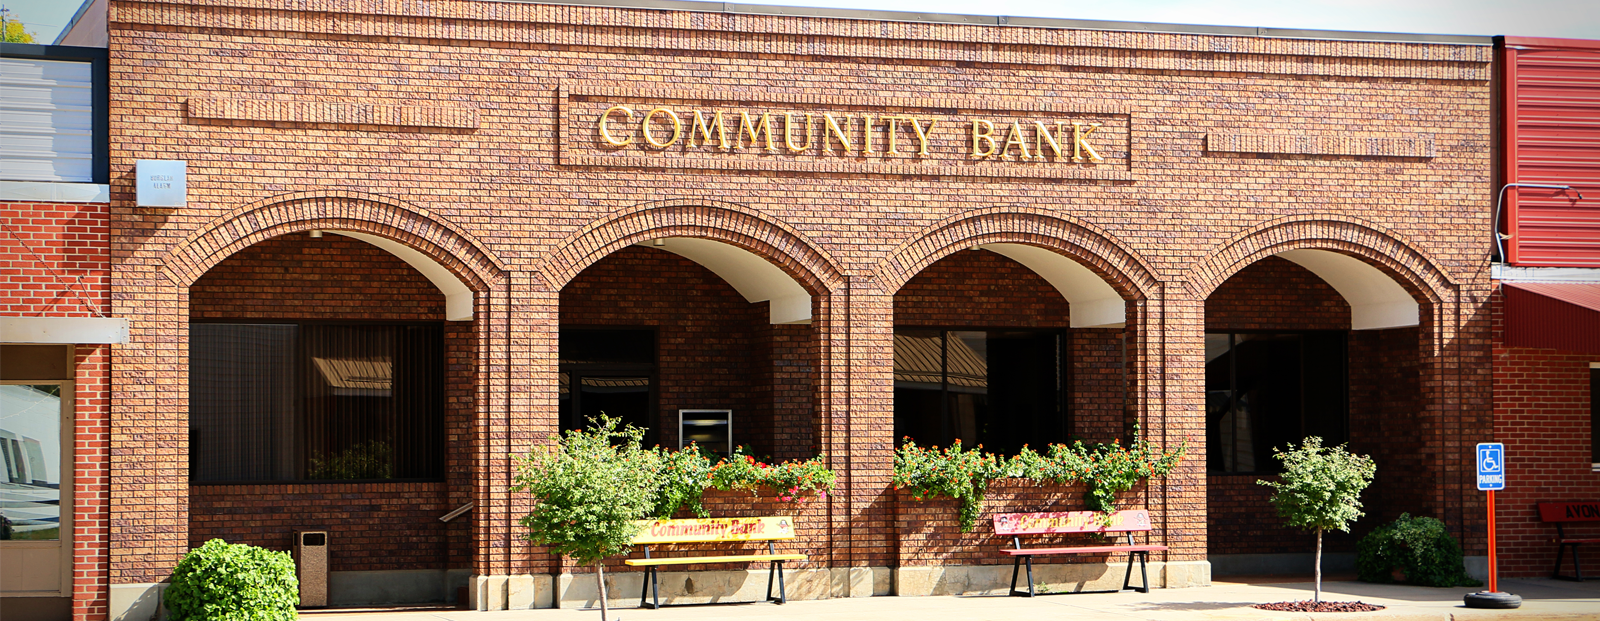 Front wall of the bank with the Community Bank logo on it